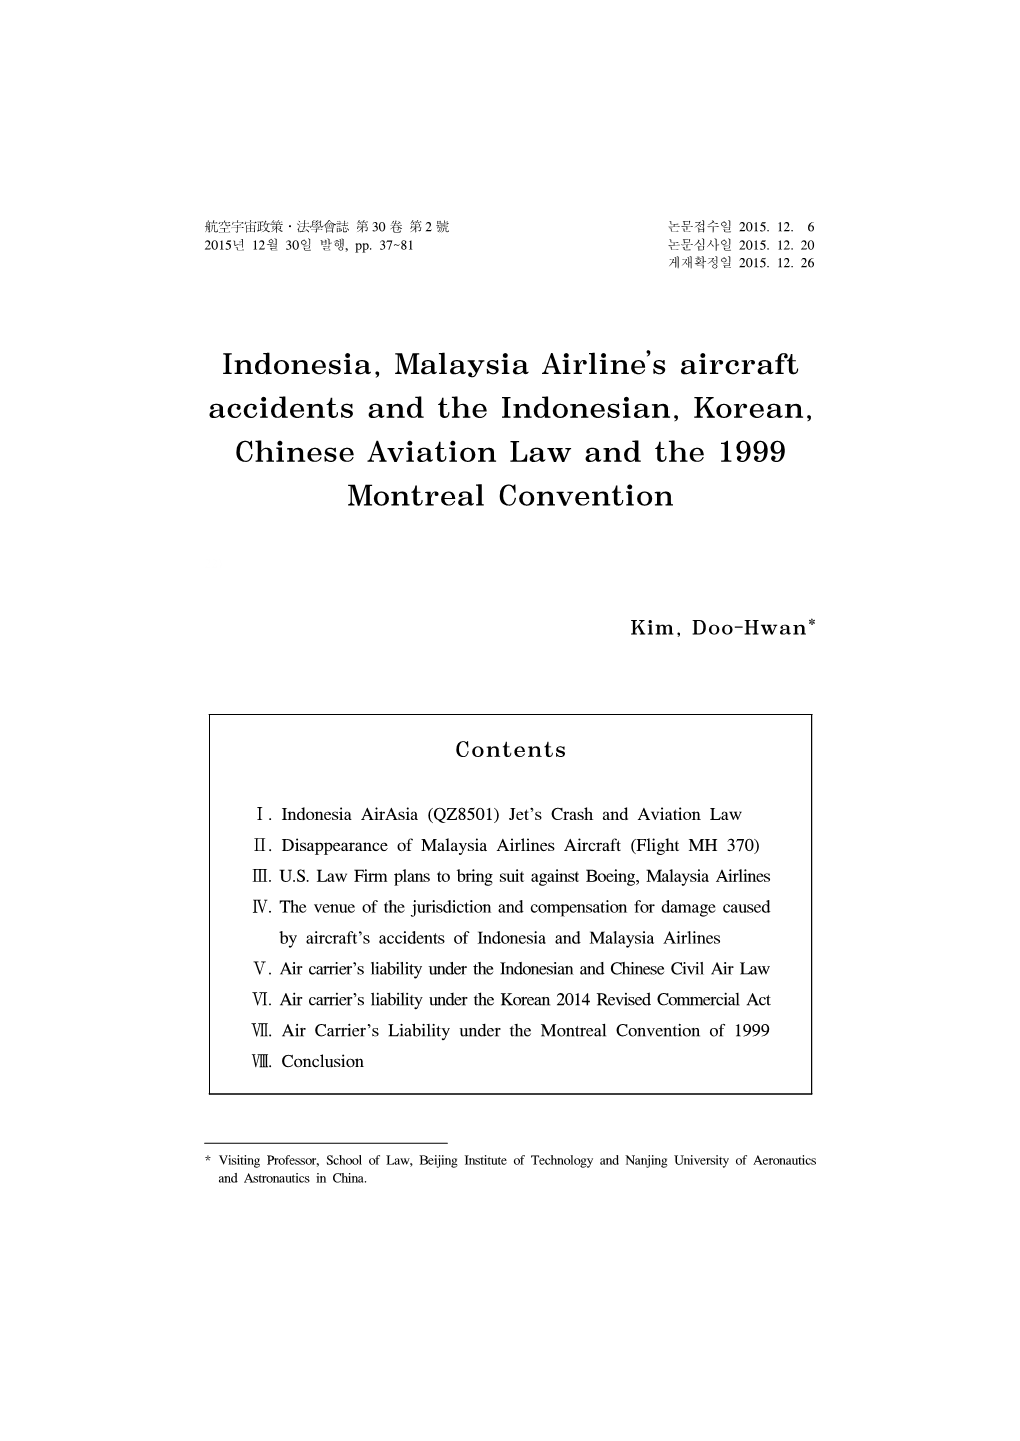 Indonesia, Malaysia Airline's Aircraft Accidents and The